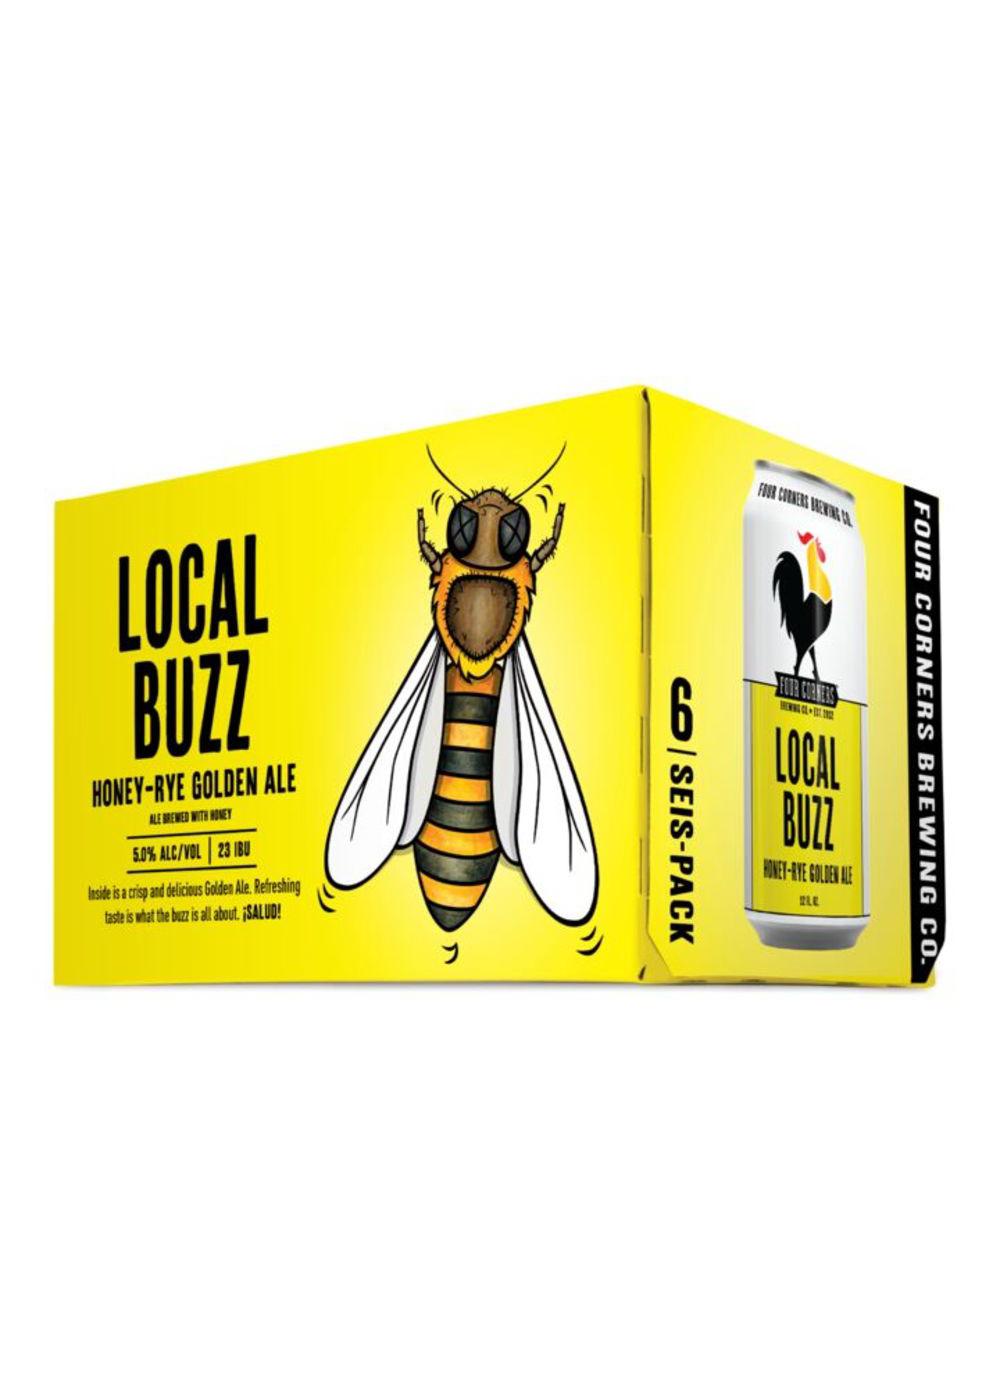 Four Corners Local Buzz Golden Ale Craft Beer 6 pk Cans; image 3 of 4